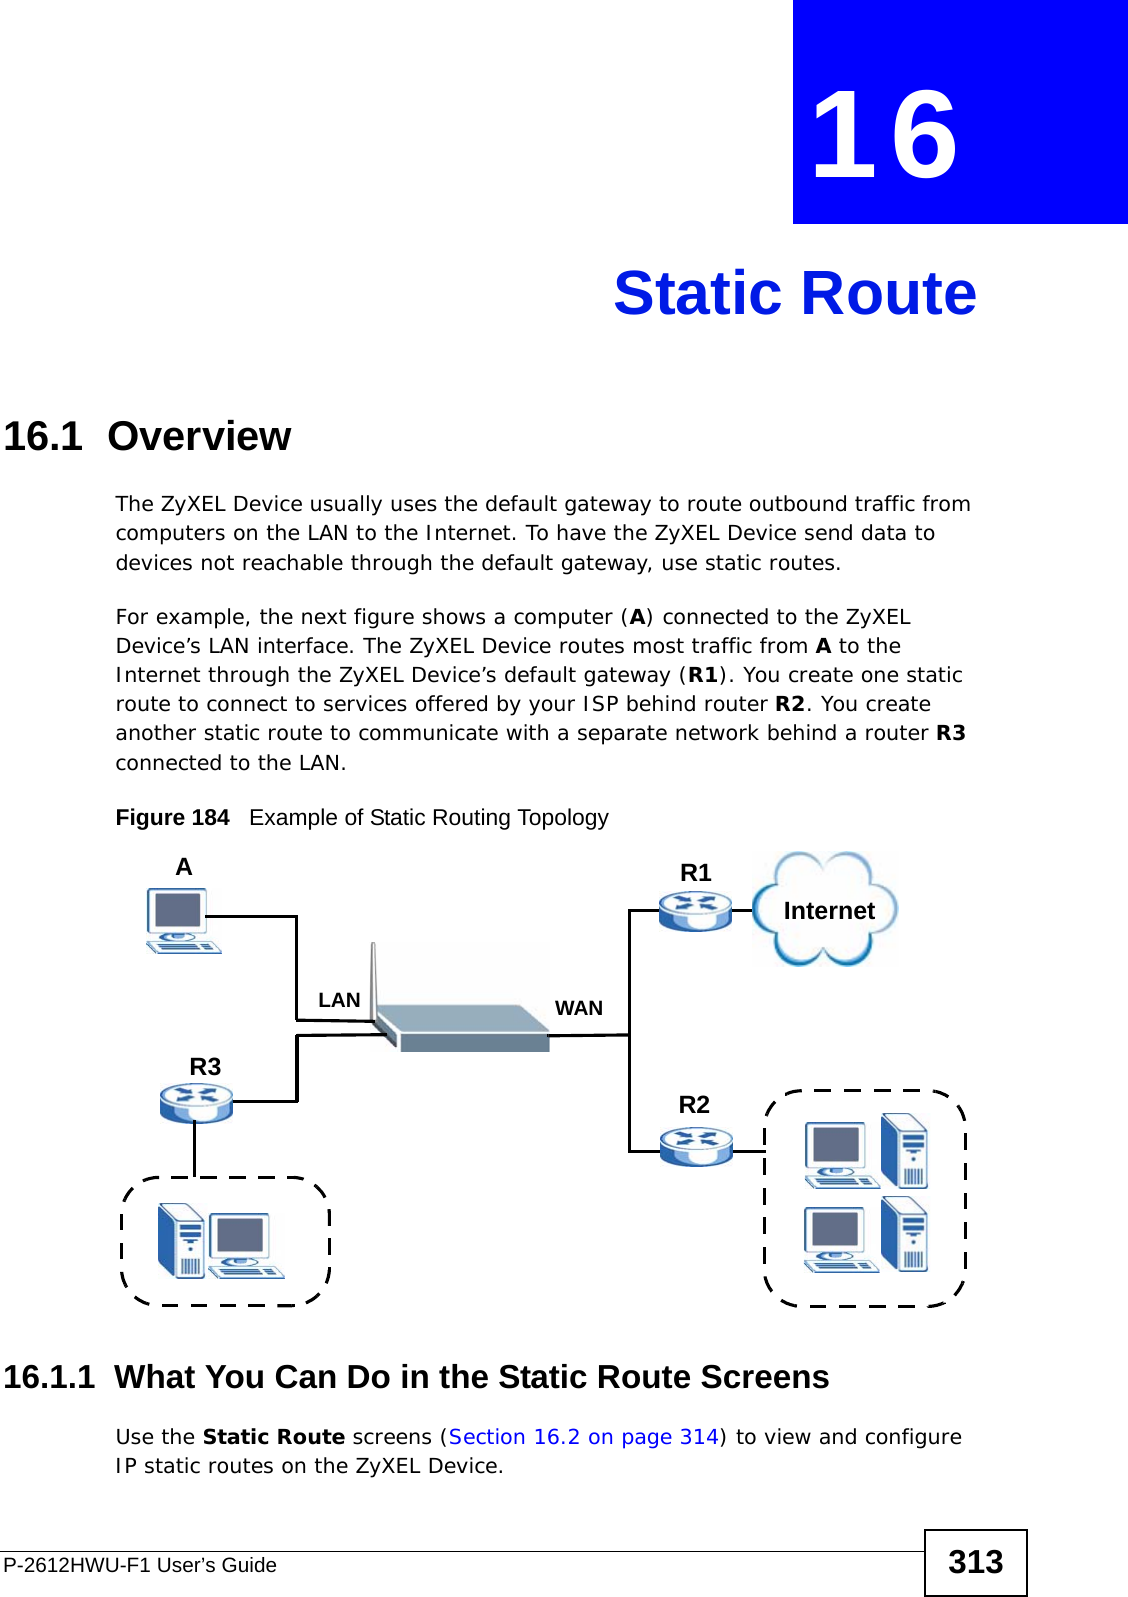 P-2612HWU-F1 User’s Guide 313CHAPTER  16 Static Route16.1  Overview   The ZyXEL Device usually uses the default gateway to route outbound traffic from computers on the LAN to the Internet. To have the ZyXEL Device send data to devices not reachable through the default gateway, use static routes.For example, the next figure shows a computer (A) connected to the ZyXEL Device’s LAN interface. The ZyXEL Device routes most traffic from A to the Internet through the ZyXEL Device’s default gateway (R1). You create one static route to connect to services offered by your ISP behind router R2. You create another static route to communicate with a separate network behind a router R3 connected to the LAN. Figure 184   Example of Static Routing Topology16.1.1  What You Can Do in the Static Route ScreensUse the Static Route screens (Section 16.2 on page 314) to view and configure IP static routes on the ZyXEL Device.WANR1R2AR3LANInternet